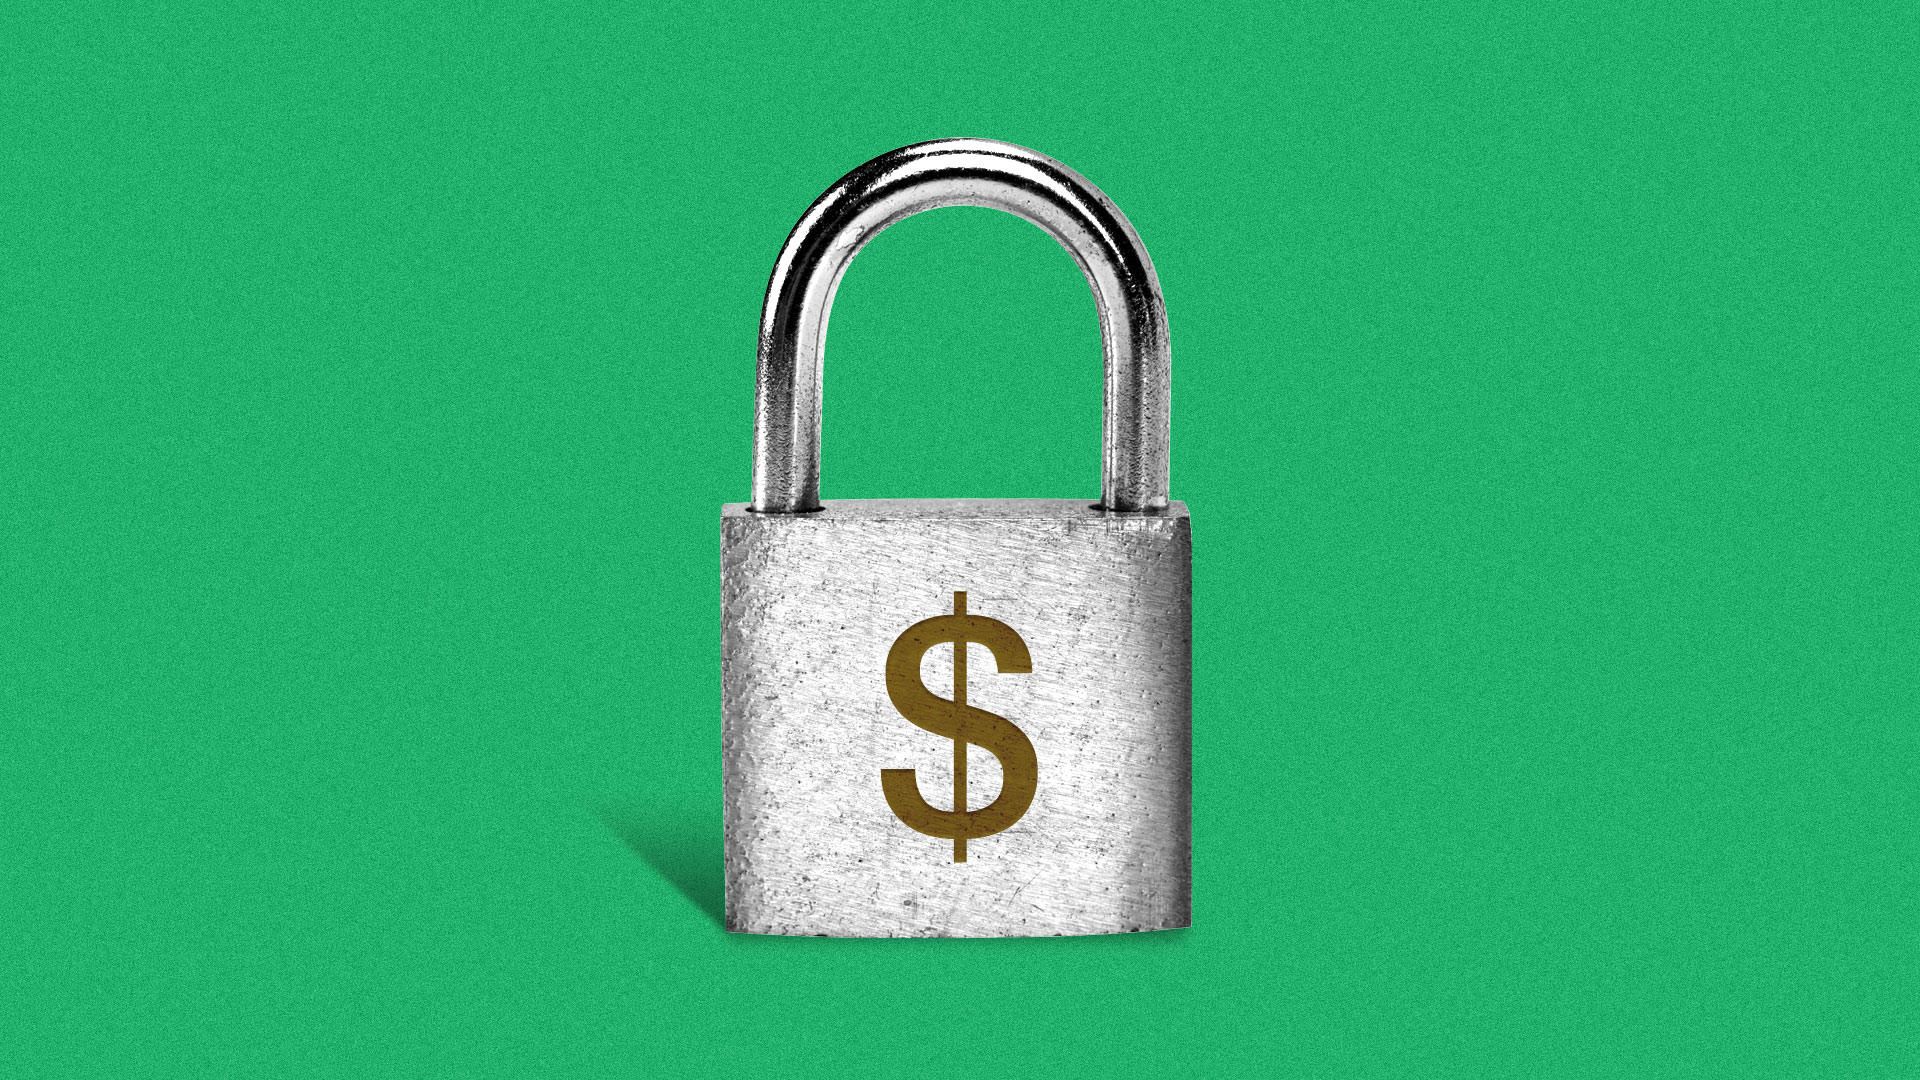 Illustration of a padlock with a dollar sign.